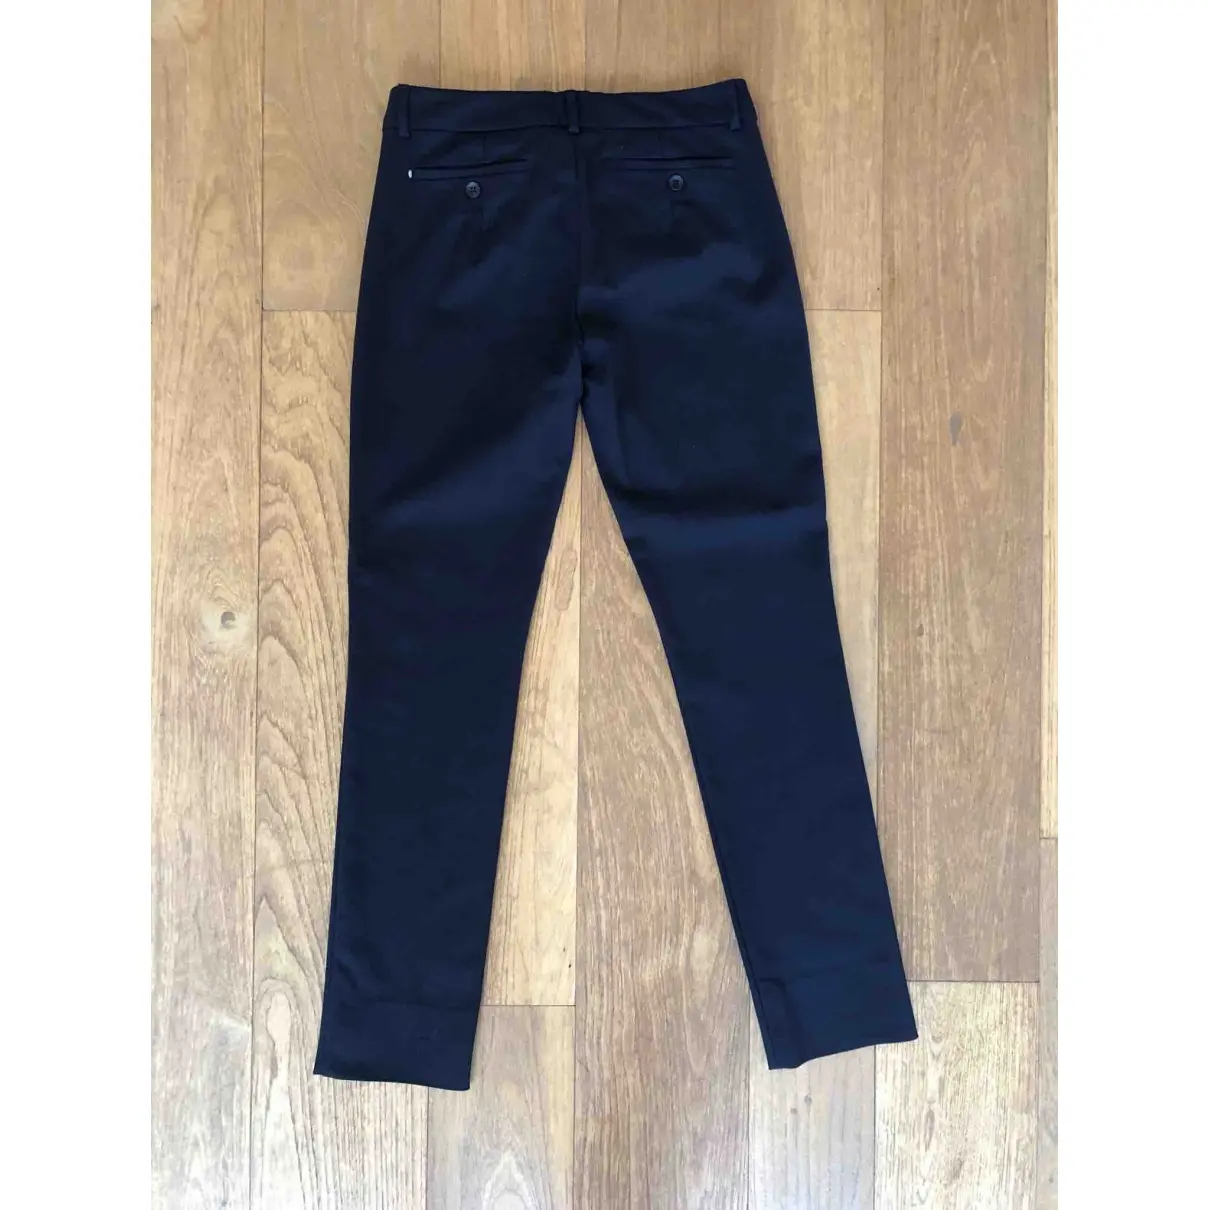 Sportmax Straight pants for sale